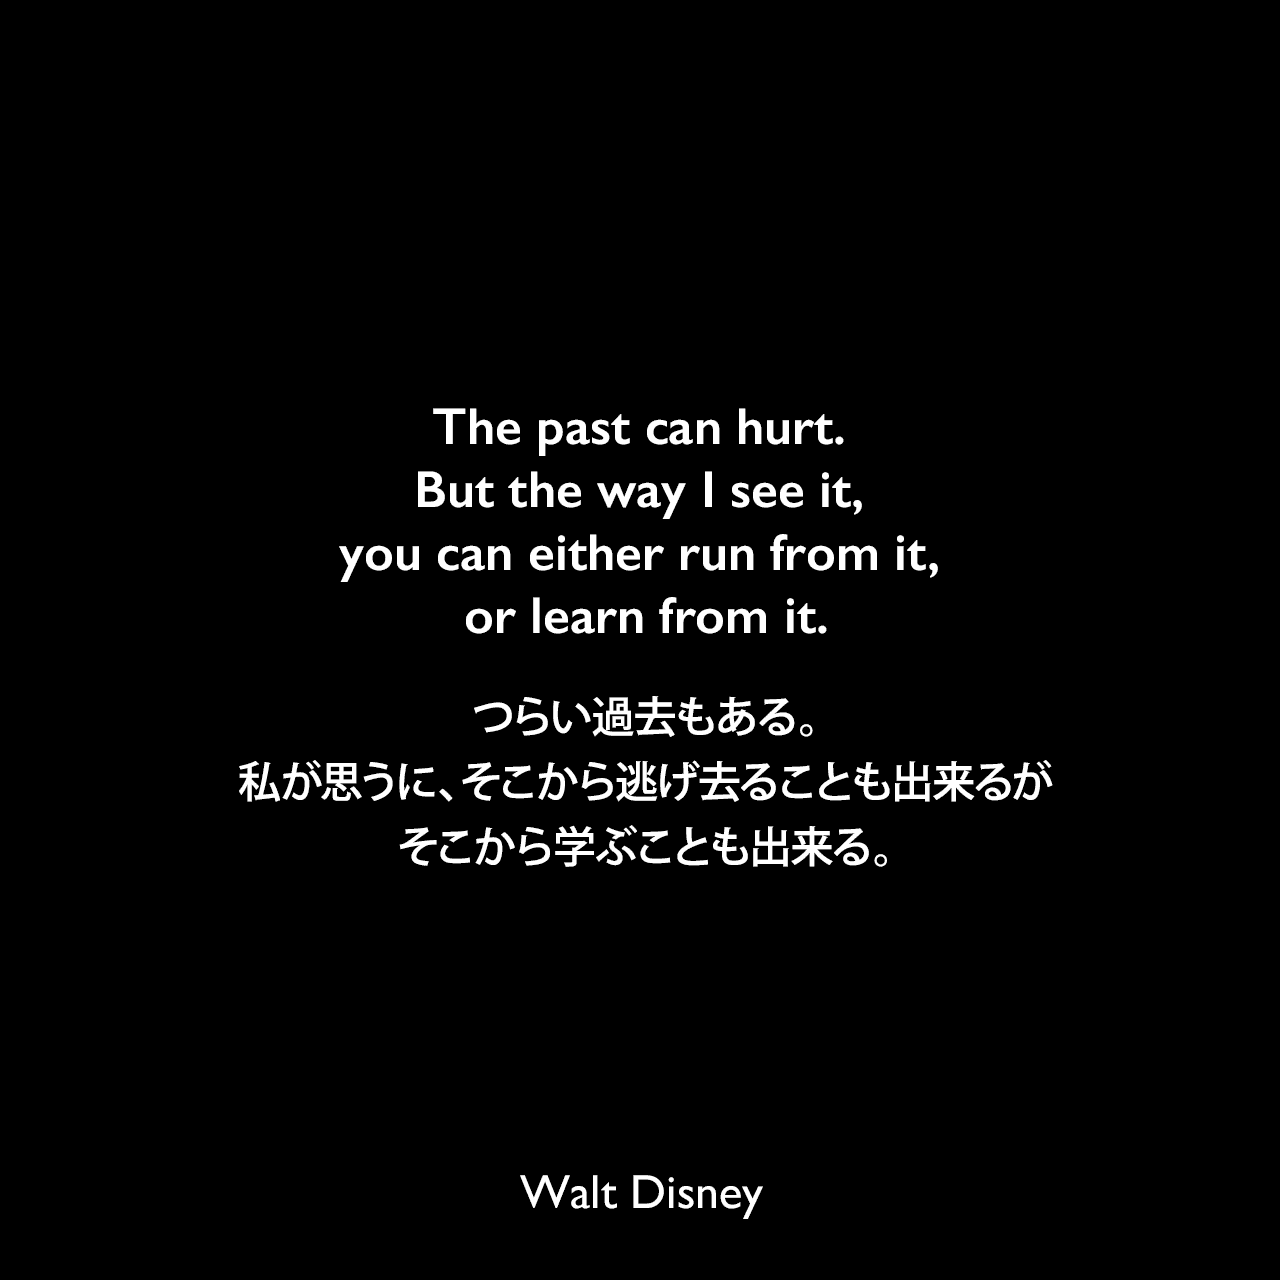 The past can hurt. But the way I see it, you can either run from it, or learn from it.つらい過去もある。私が思うに、そこから逃げ去ることも出来るが、そこから学ぶことも出来る。Walt Disney